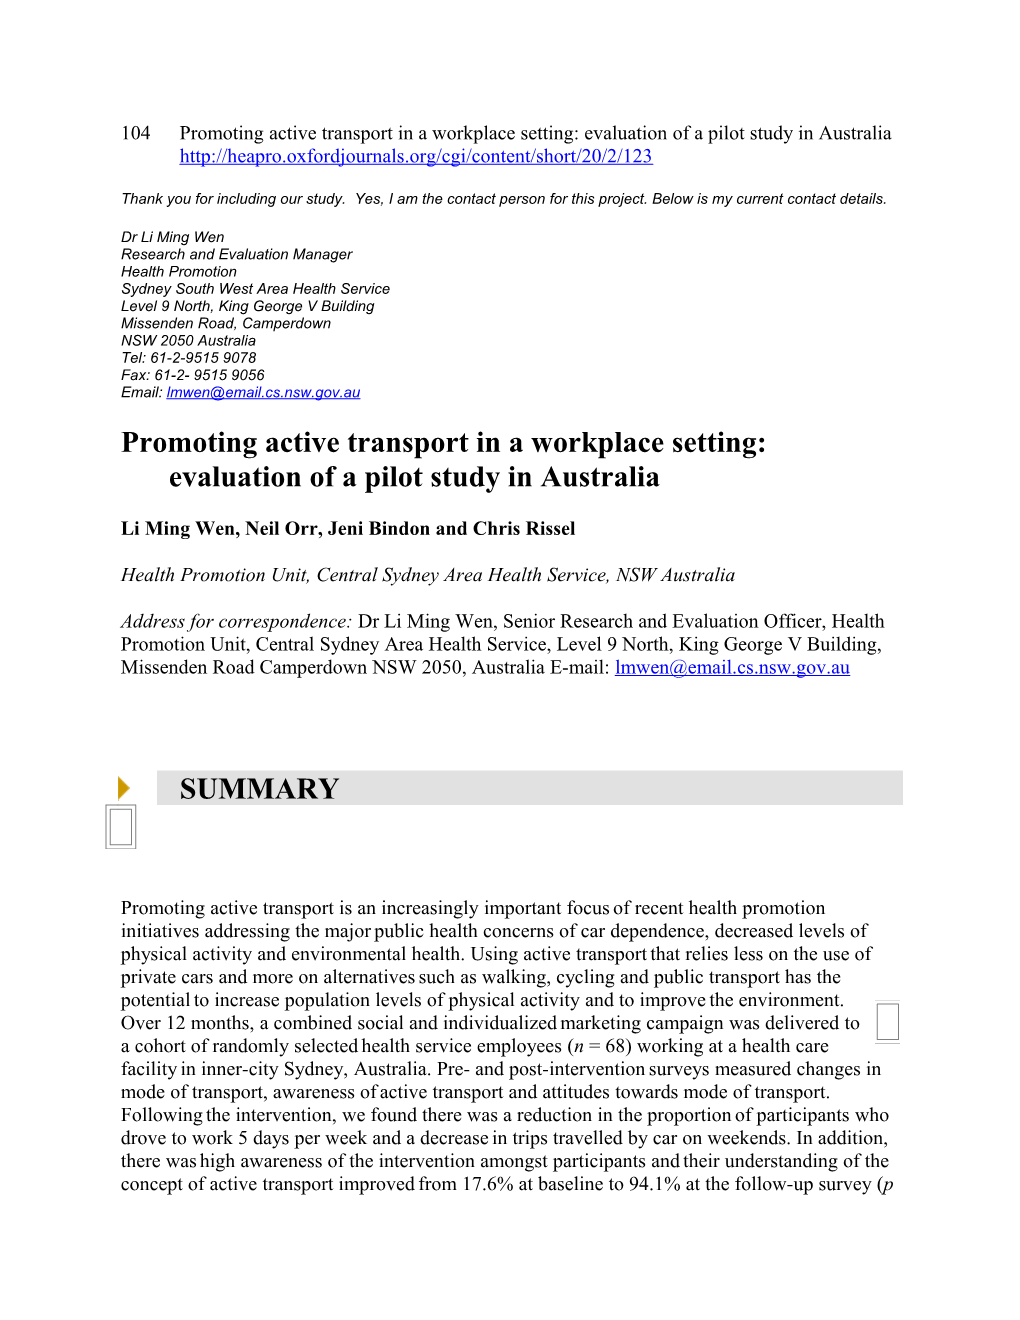 104Promoting Active Transport in a Workplace Setting: Evaluation of a Pilot Study in Australia